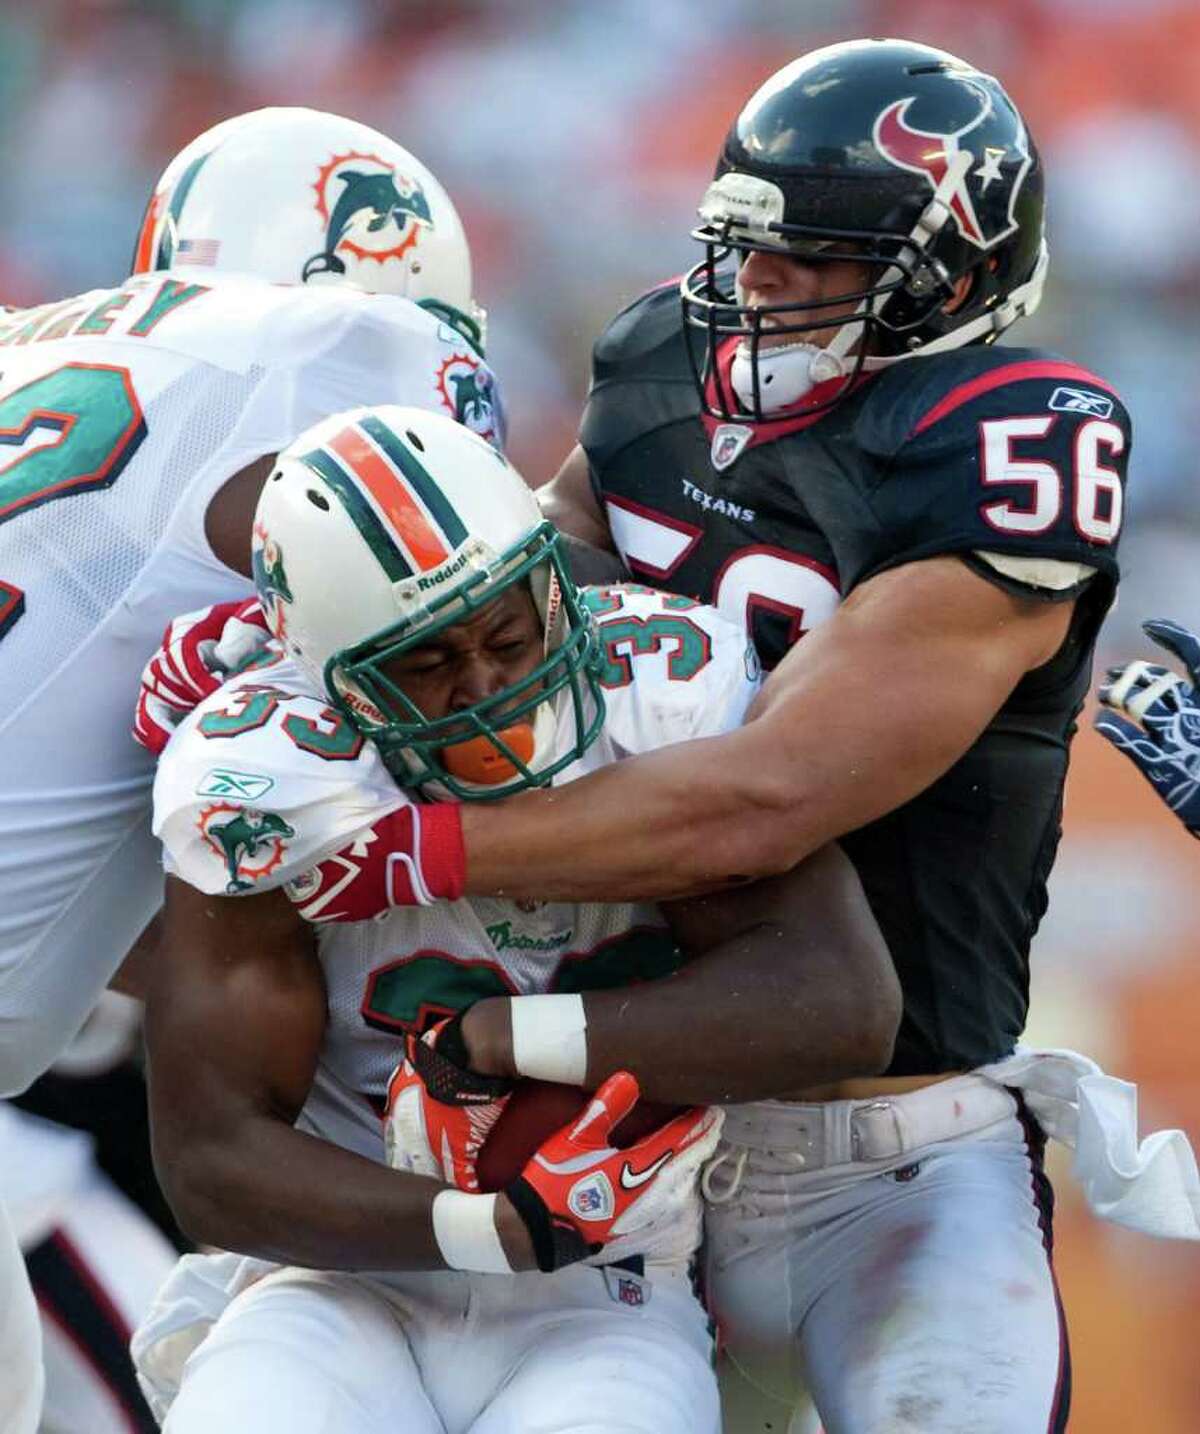 Dolphins running back Daniel Thomas meets a brick wall in the form of Texans linebacker Brian Cushing during Game 2 at Sun Life Stadium in Miami.